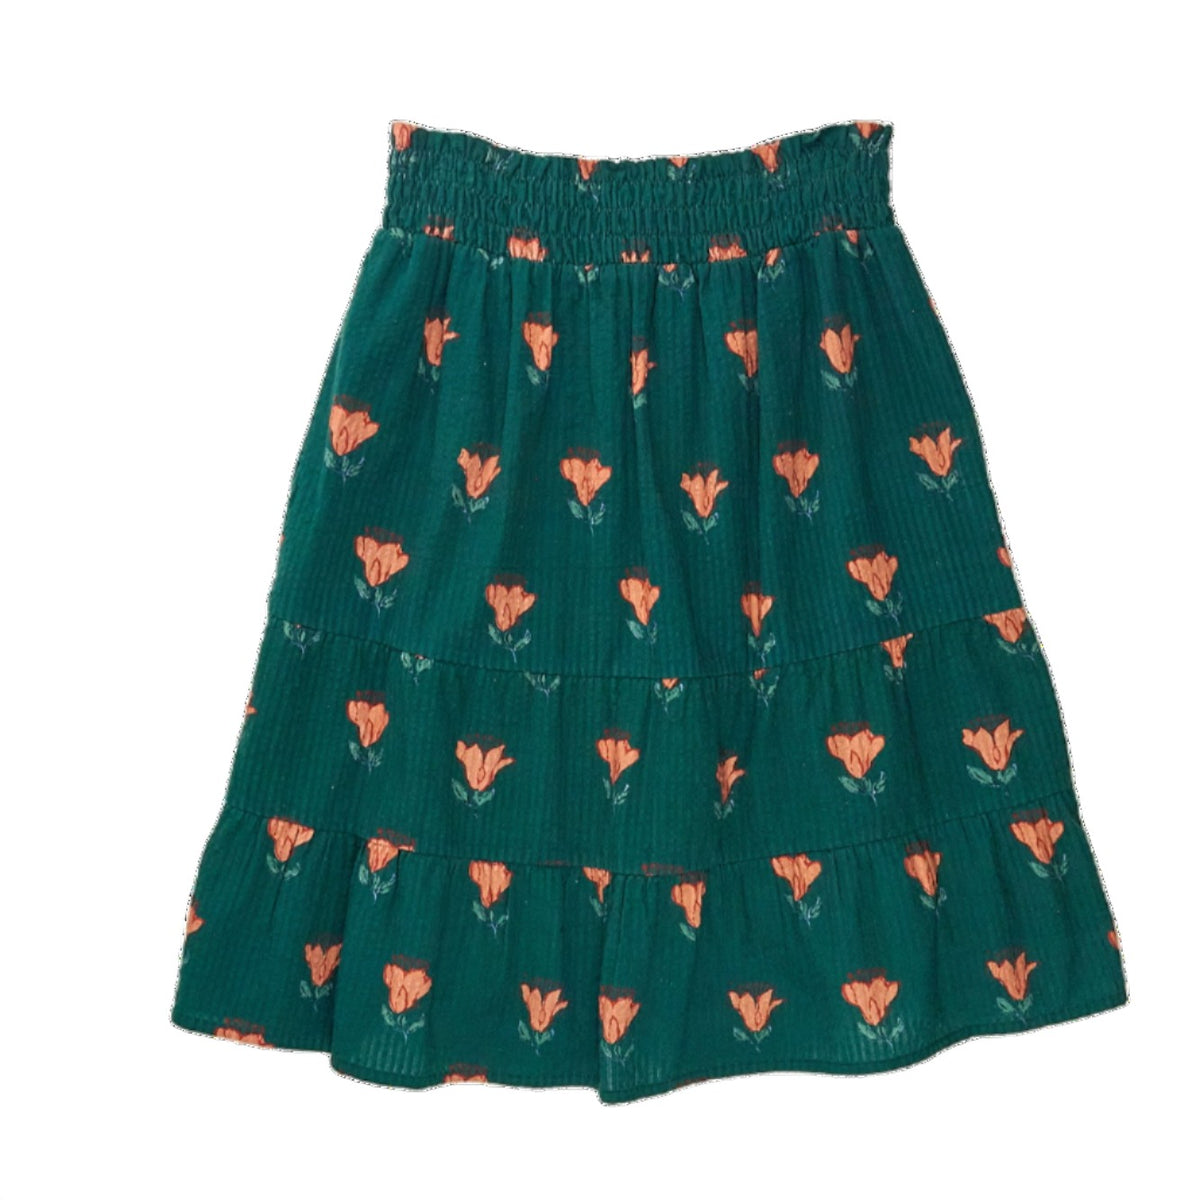 YMC Green Floral Tiered Skirt